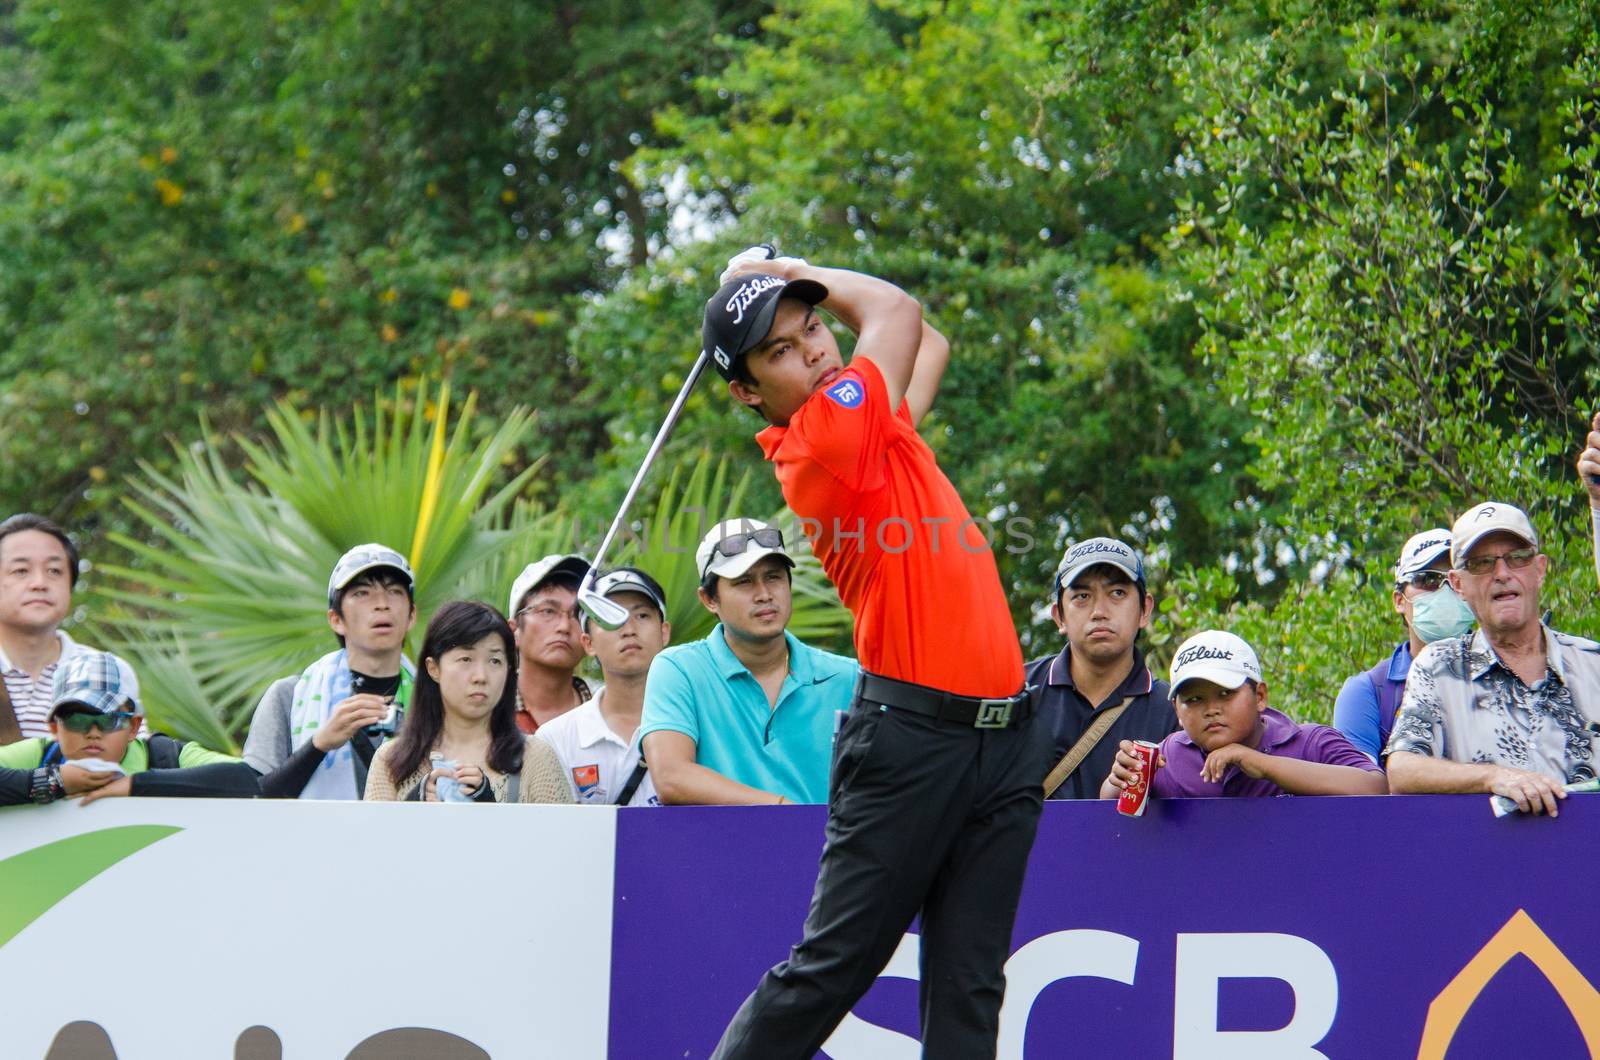 Natipong Srithong in Thailand Golf Championship 2015 by chatchai